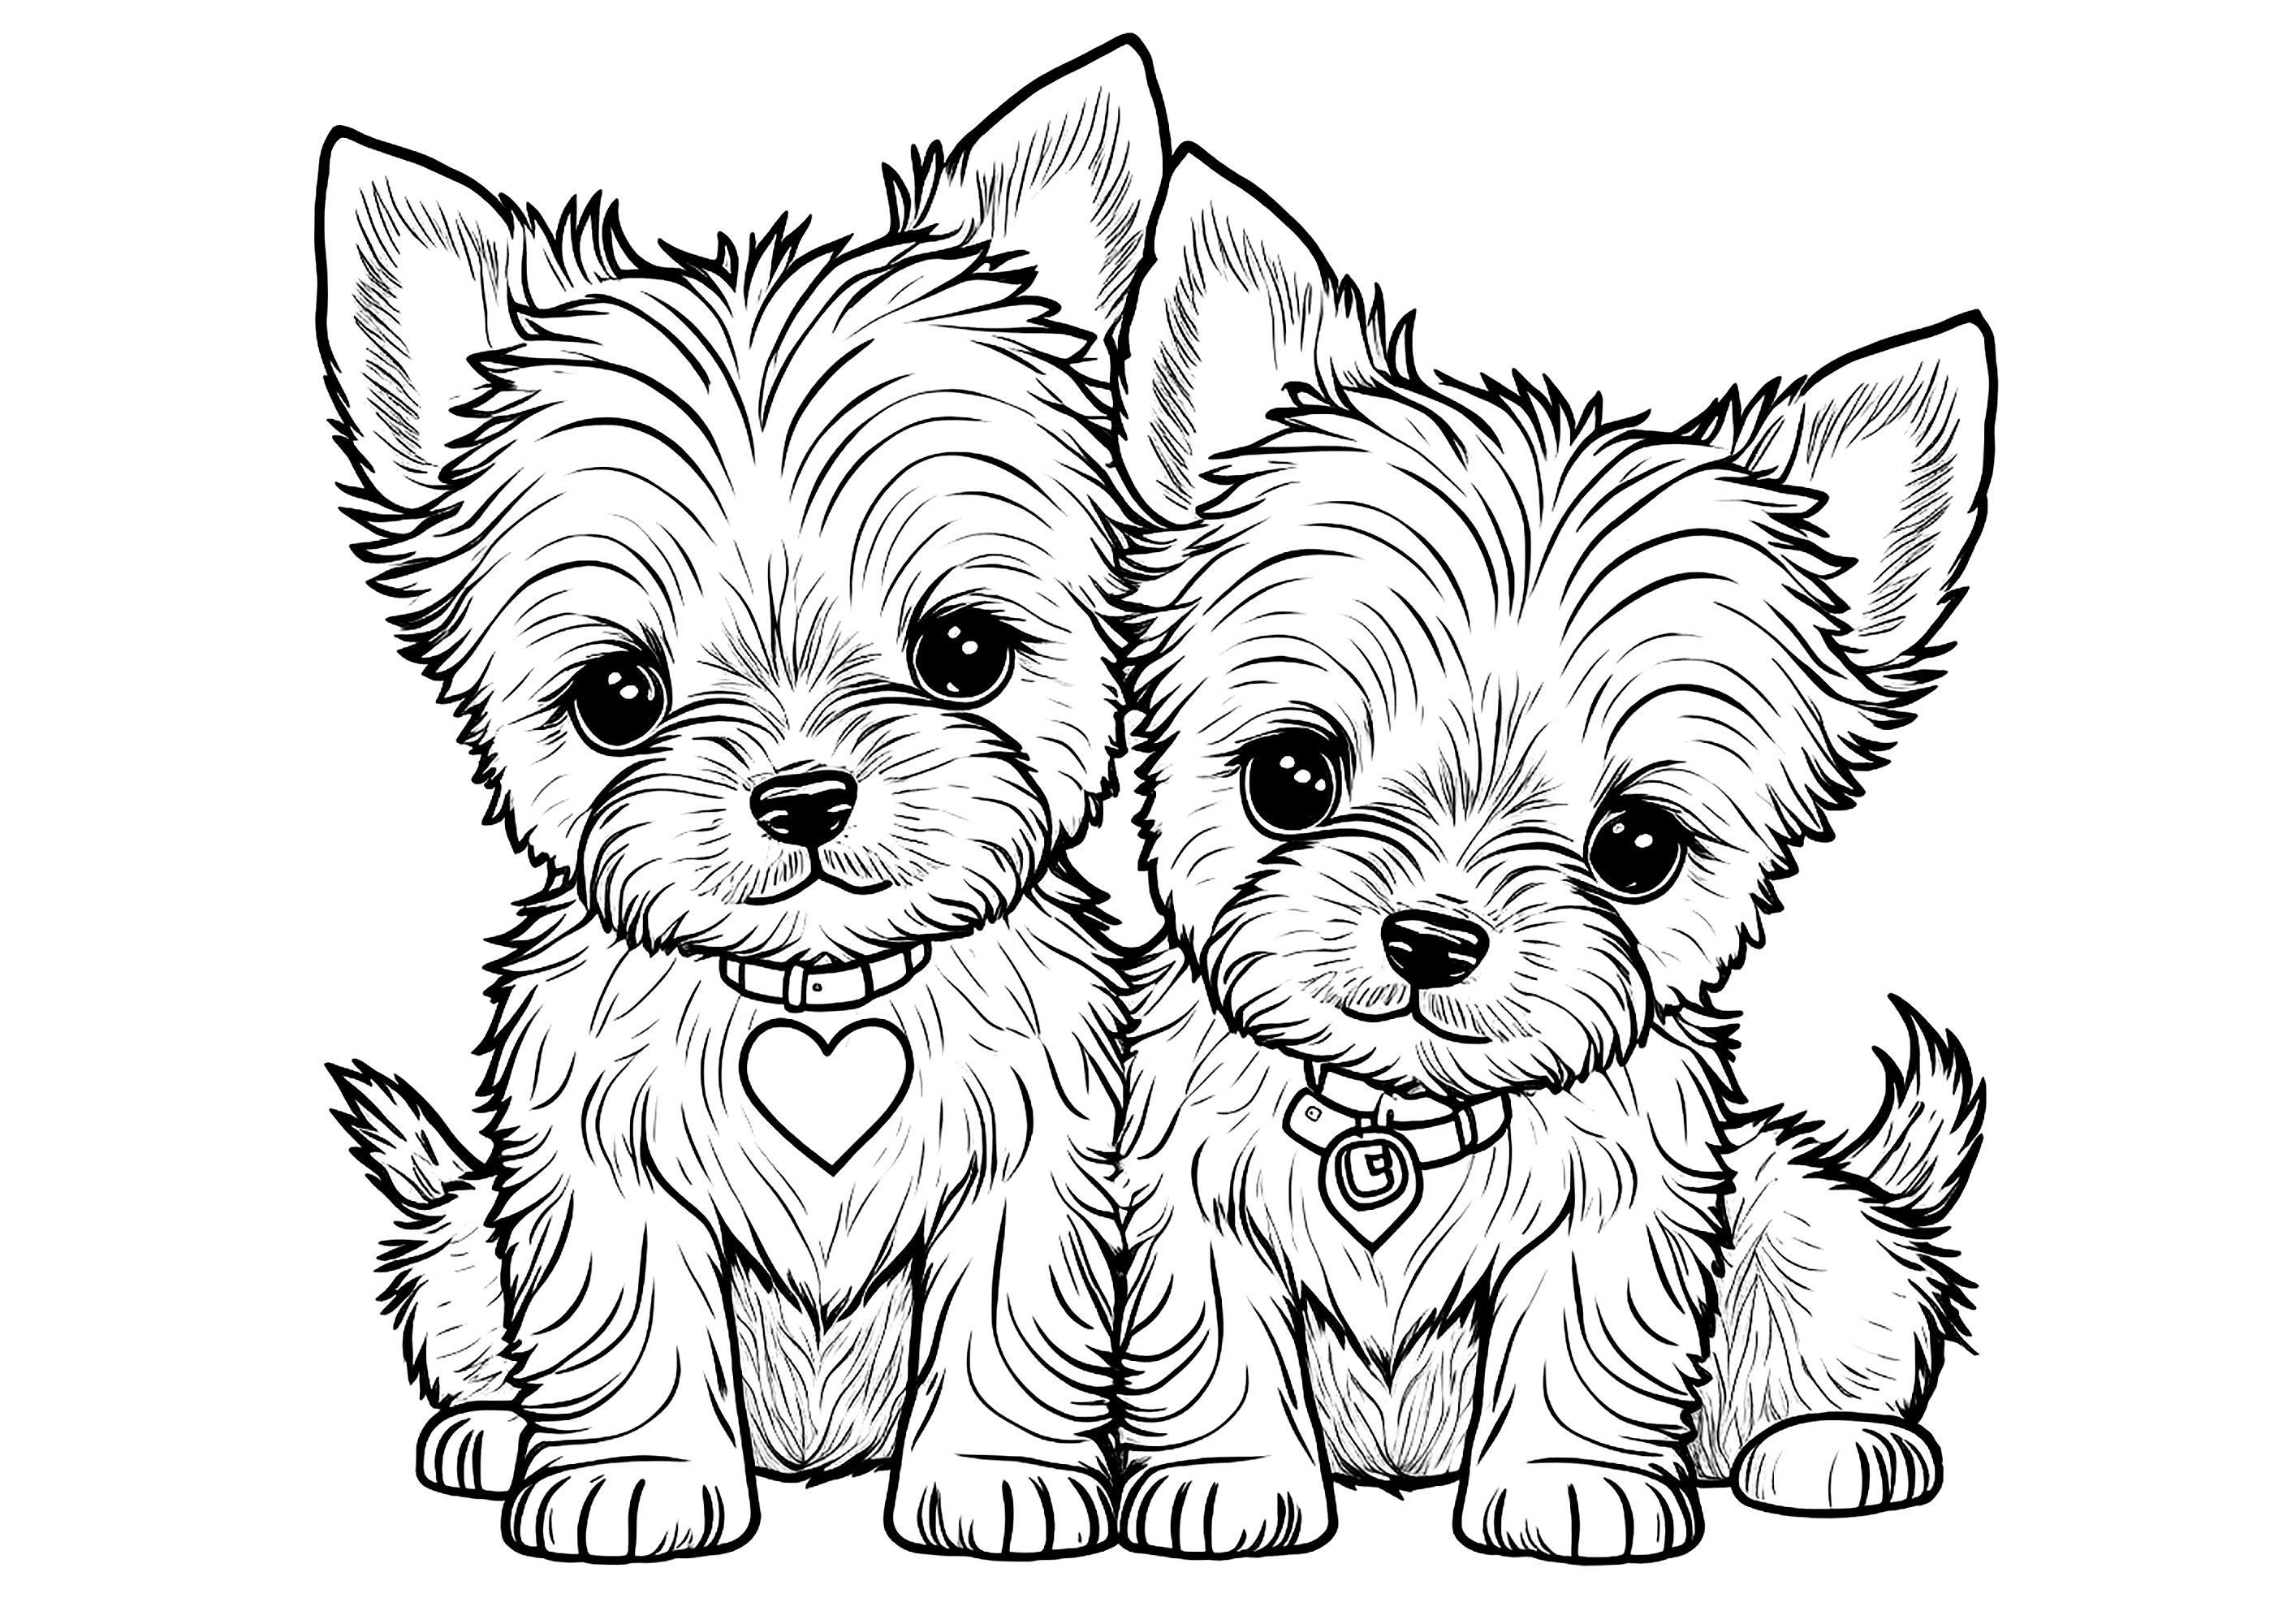 Two cute little puppies to color. The two little puppies pictured in this coloring page are adorable and kids will love coloring them. They can choose their favorite colors for the puppies and their accessories and have fun creating their own unique versions.